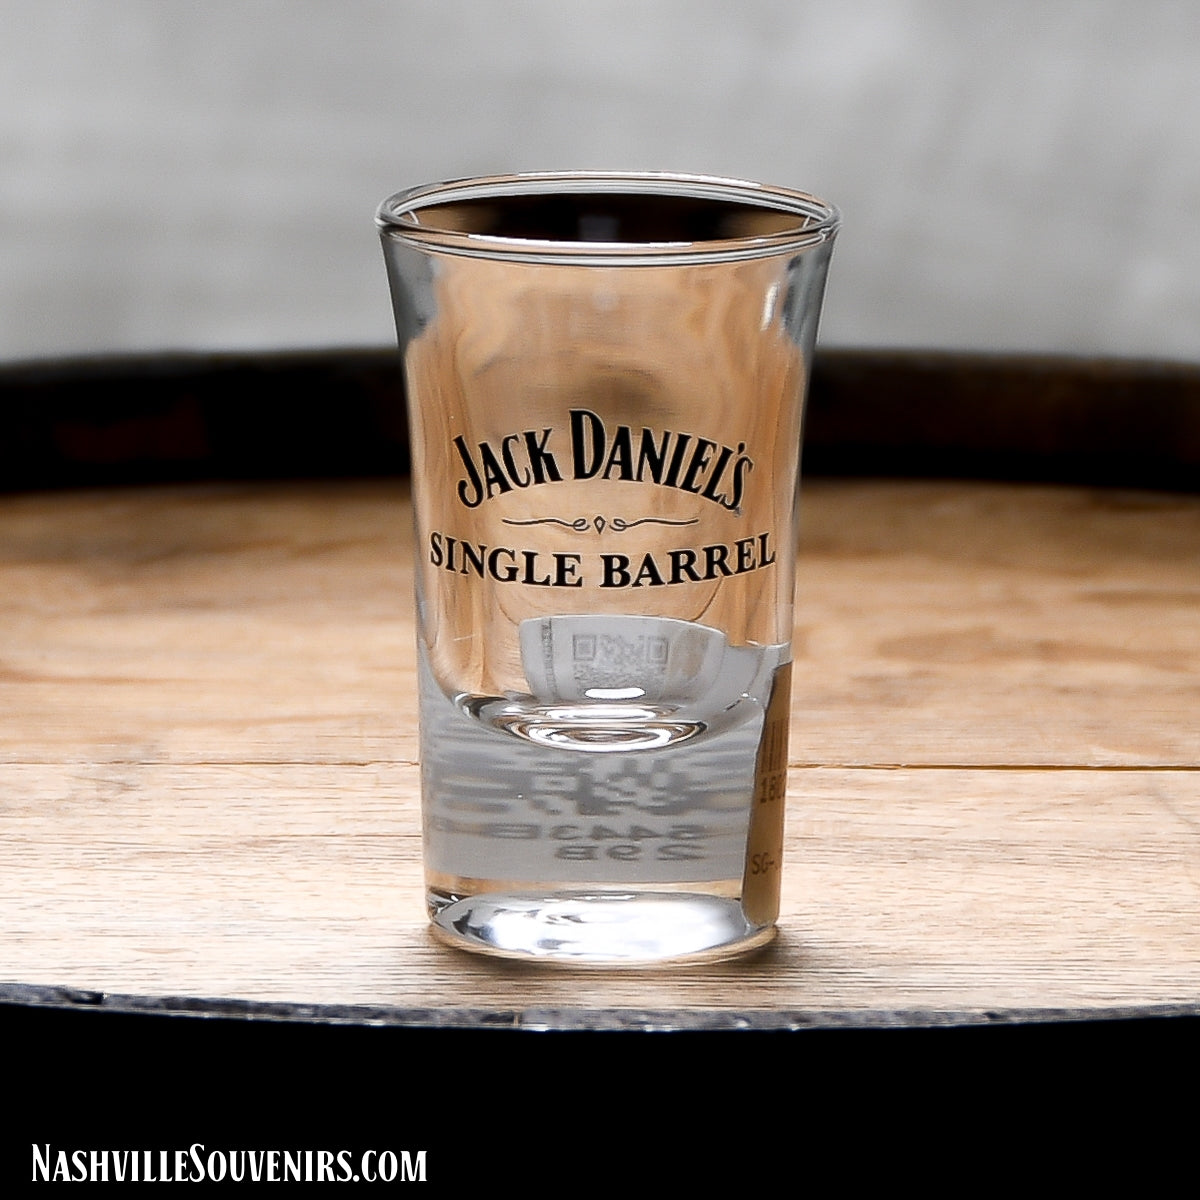 Officially licensed Jack Daniels Single Barrel Shot Glass. FREE SHIPPING on all US orders over $75!